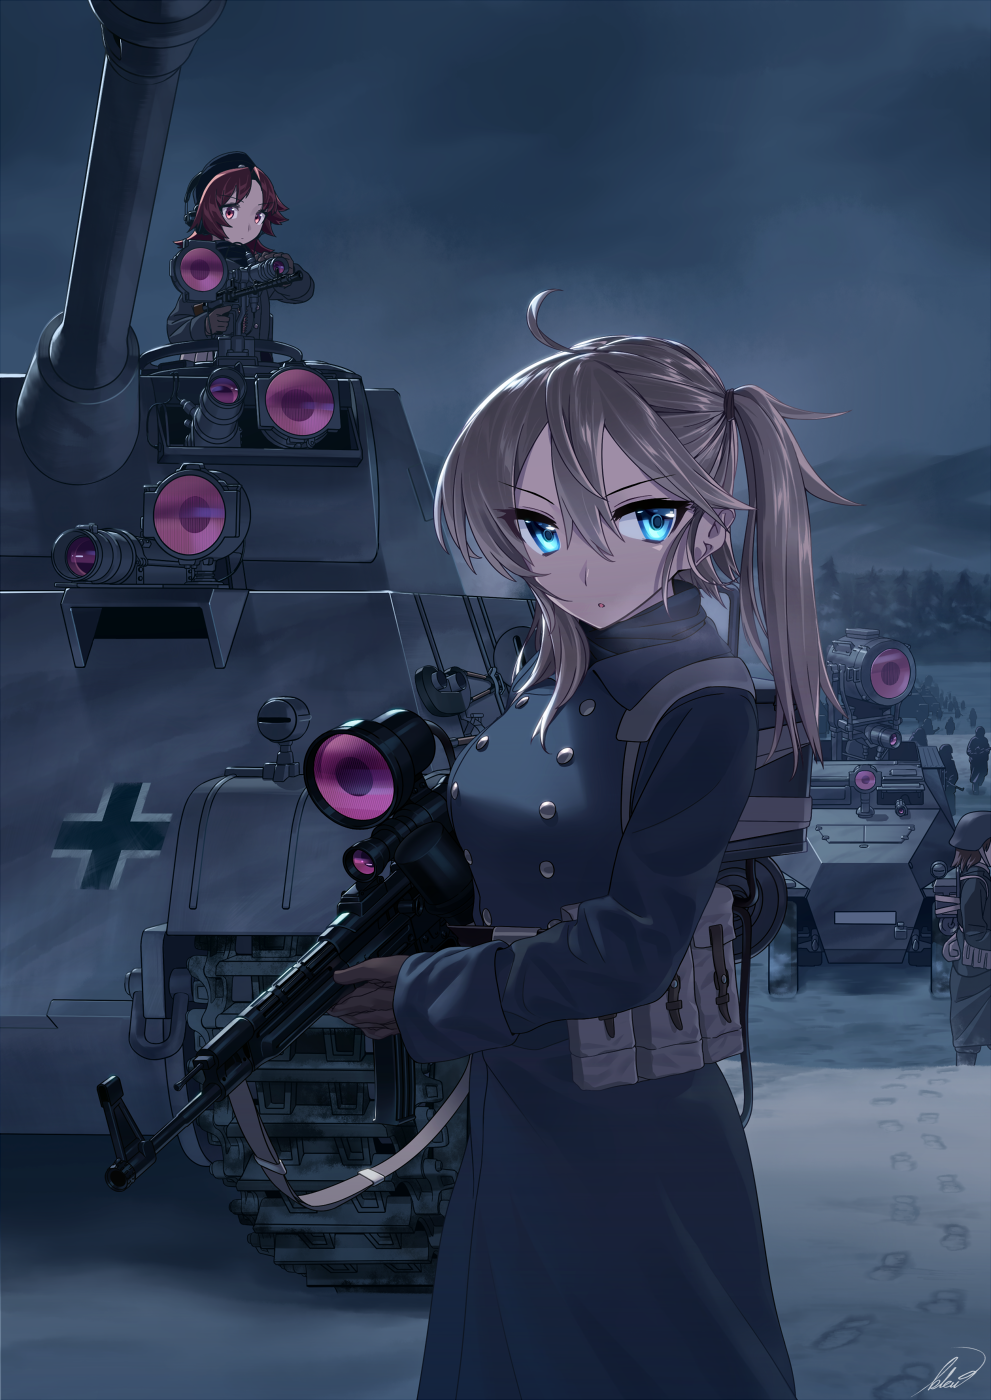 3girls :o ahoge assault_rifle blew_andwhite blonde_hair blue_eyes blurry brown_eyes caterpillar_tracks clouds cloudy_sky coat dark depth_of_field footprints garrison_cap gloves gun half-track hat headset helmet highres hill infrared load_bearing_equipment long_hair looking_to_the_side machine_gun mg34 military military_vehicle multiple_girls night open_mouth original panzerkampfwagen_panther pouch purple_hair rifle scenery scope sdkfz_251 short_hair signature silhouette sky sling snow soldier stg44 tank tree trench_coat twintails vehicle weapon winter winter_clothes winter_coat world_war_ii